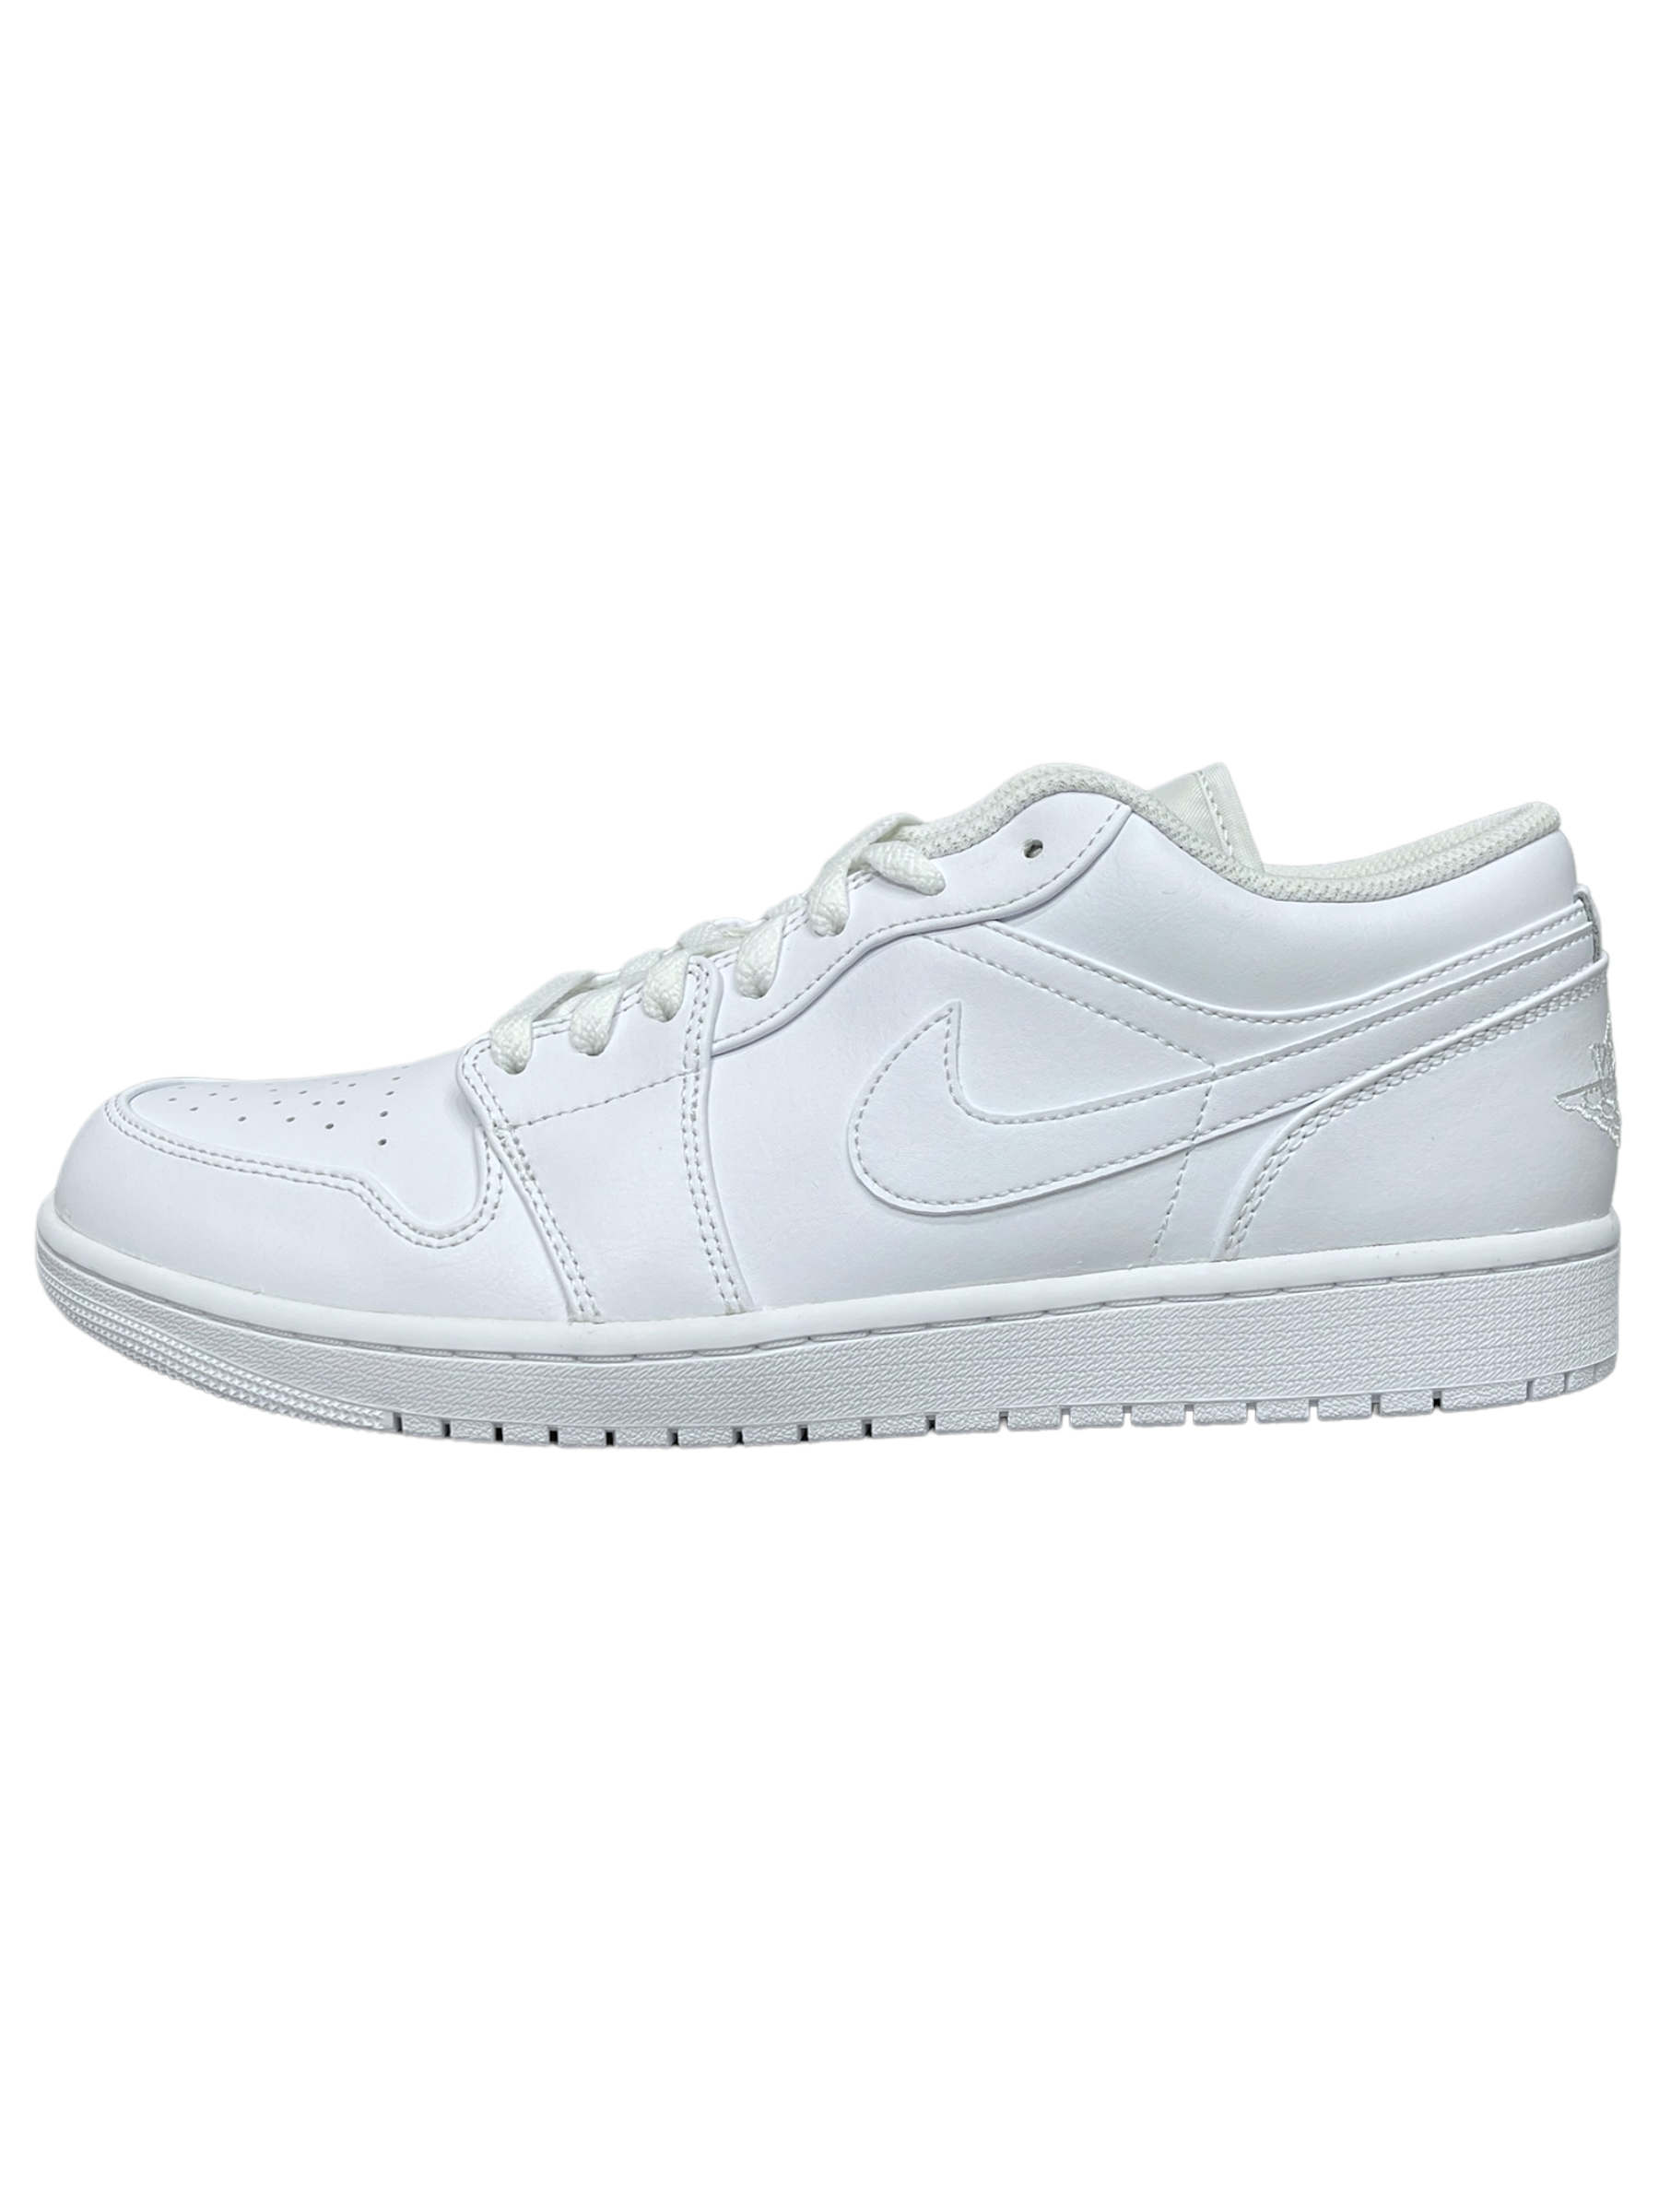 Air Jordan 1 Low Triple White - Genuine Design Luxury Consignment for Men. New & Pre-Owned Clothing, Shoes, & Accessories. Calgary, Canada